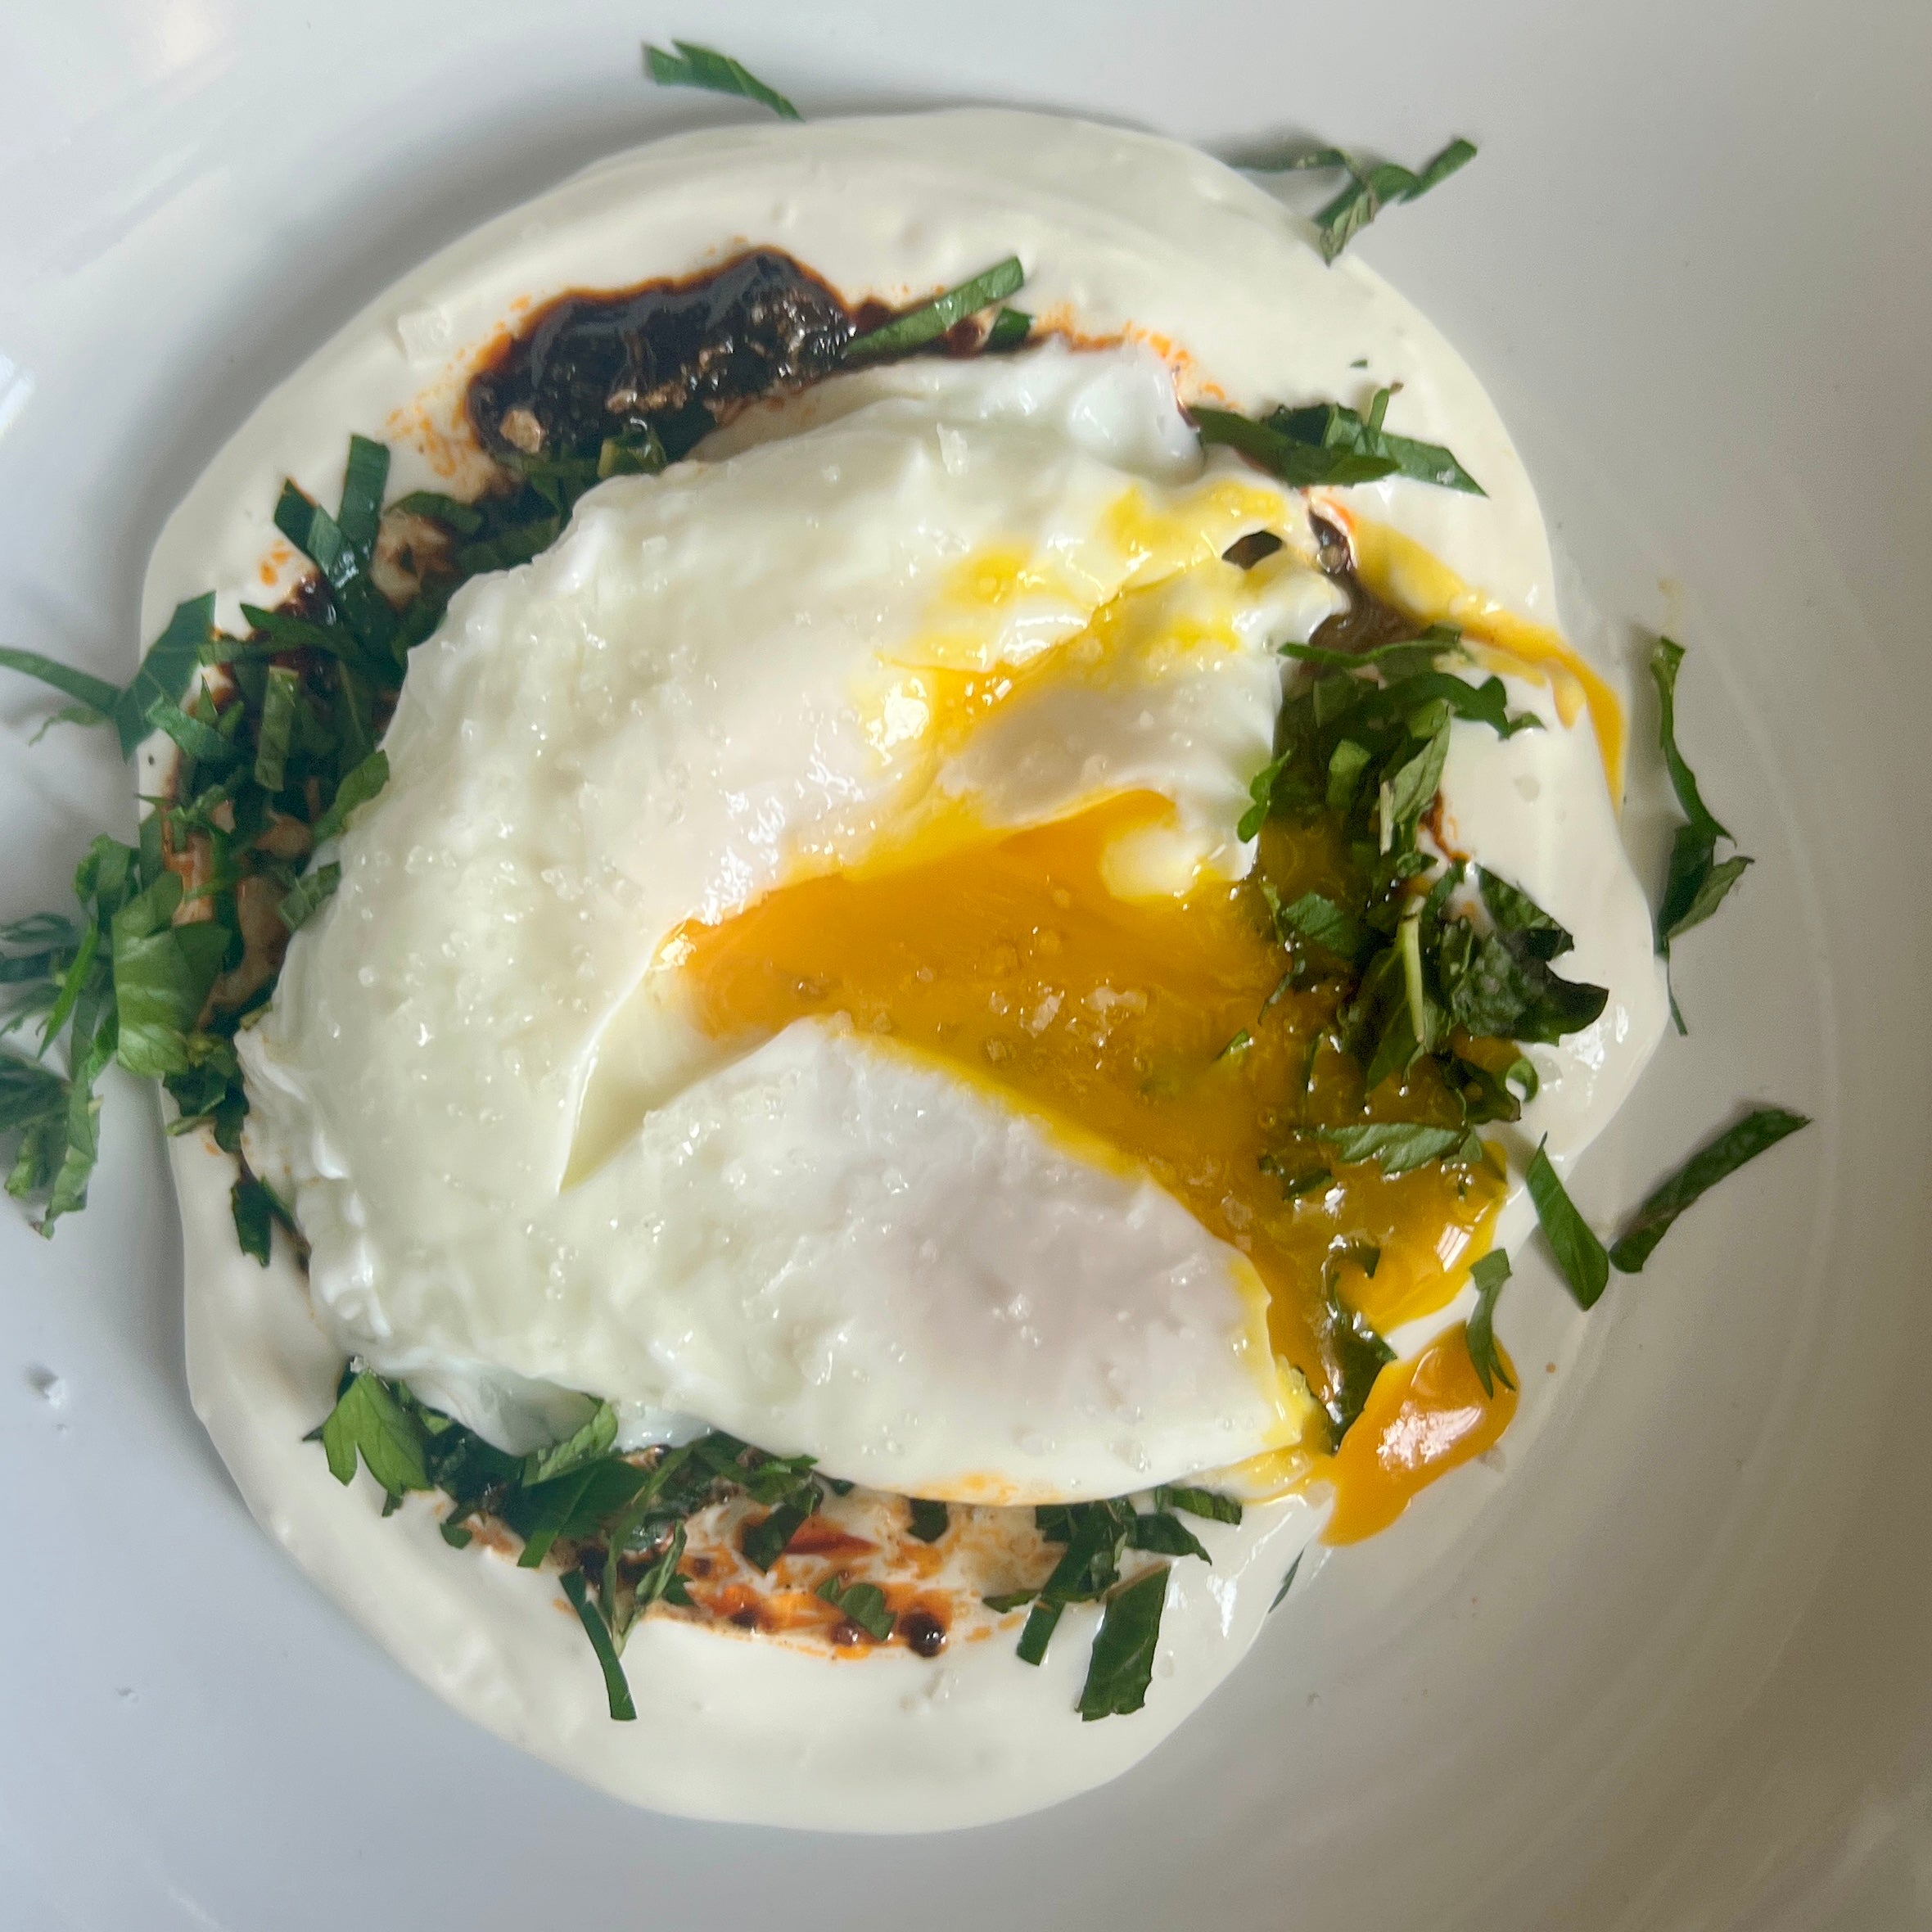 Recipe This, How To Poach An Egg In The Microwave, Recipe